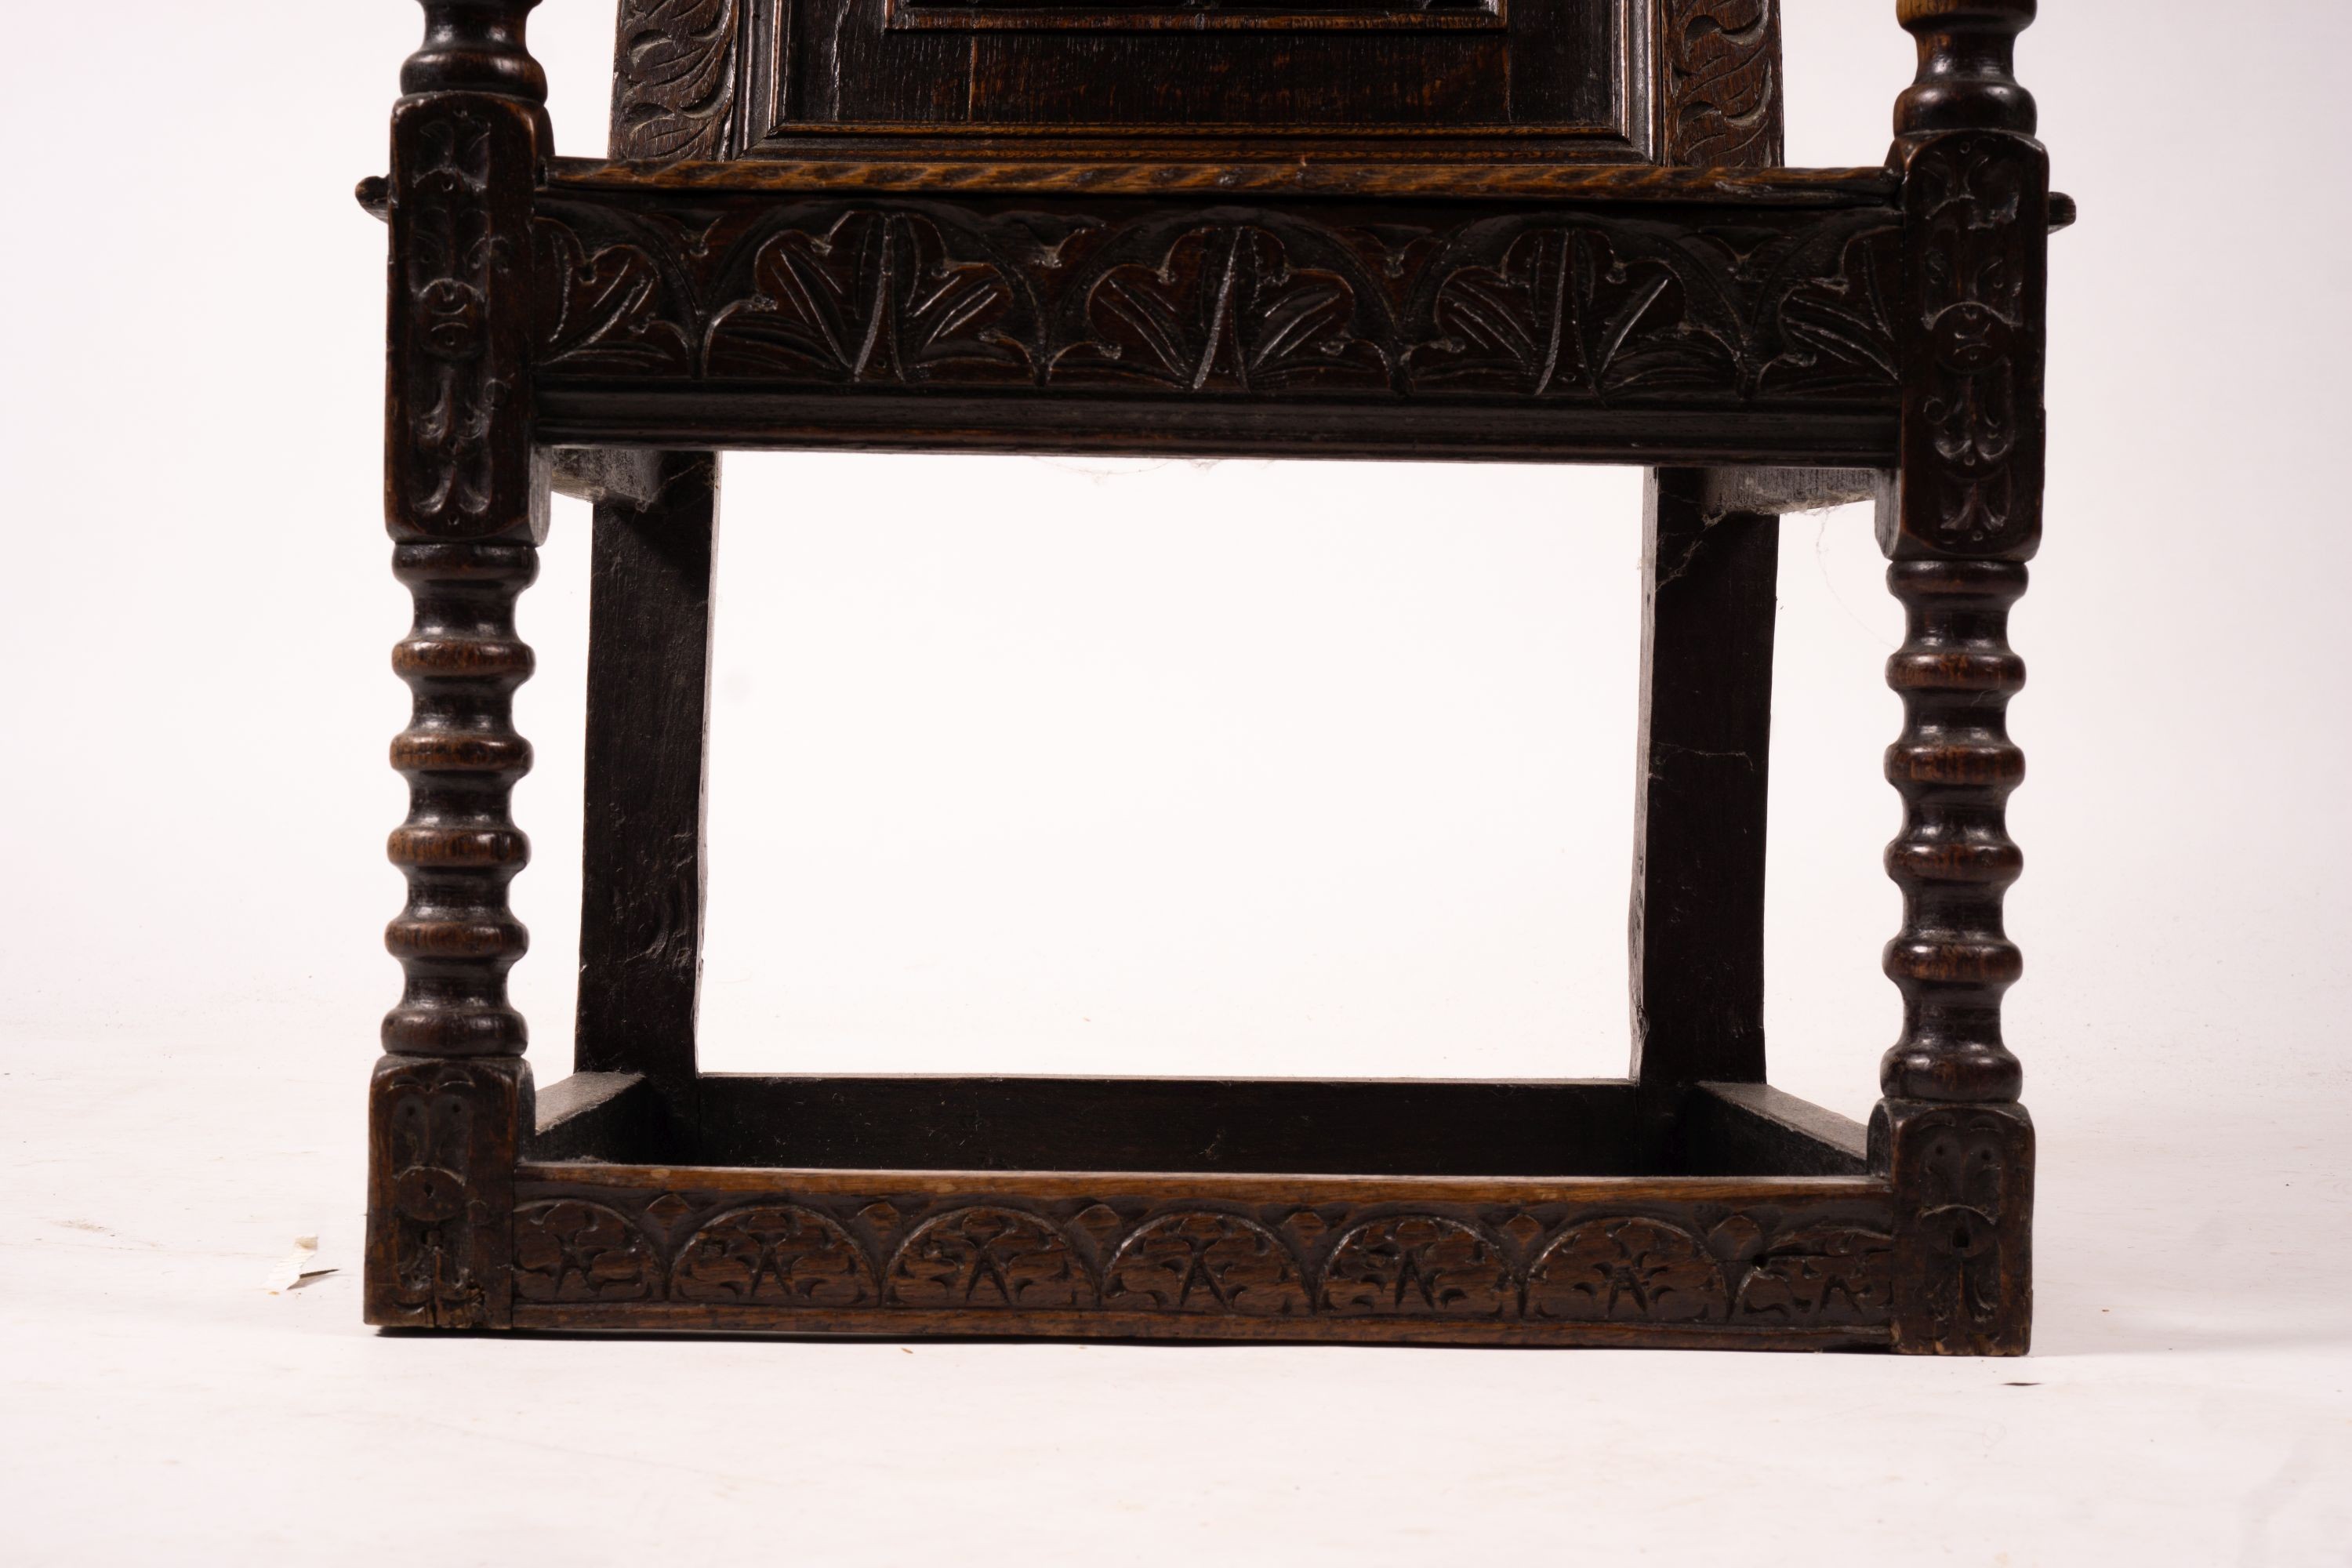 An 18th century style carved oak wainscot chair, width 56cm, depth 60cm, height 101cm